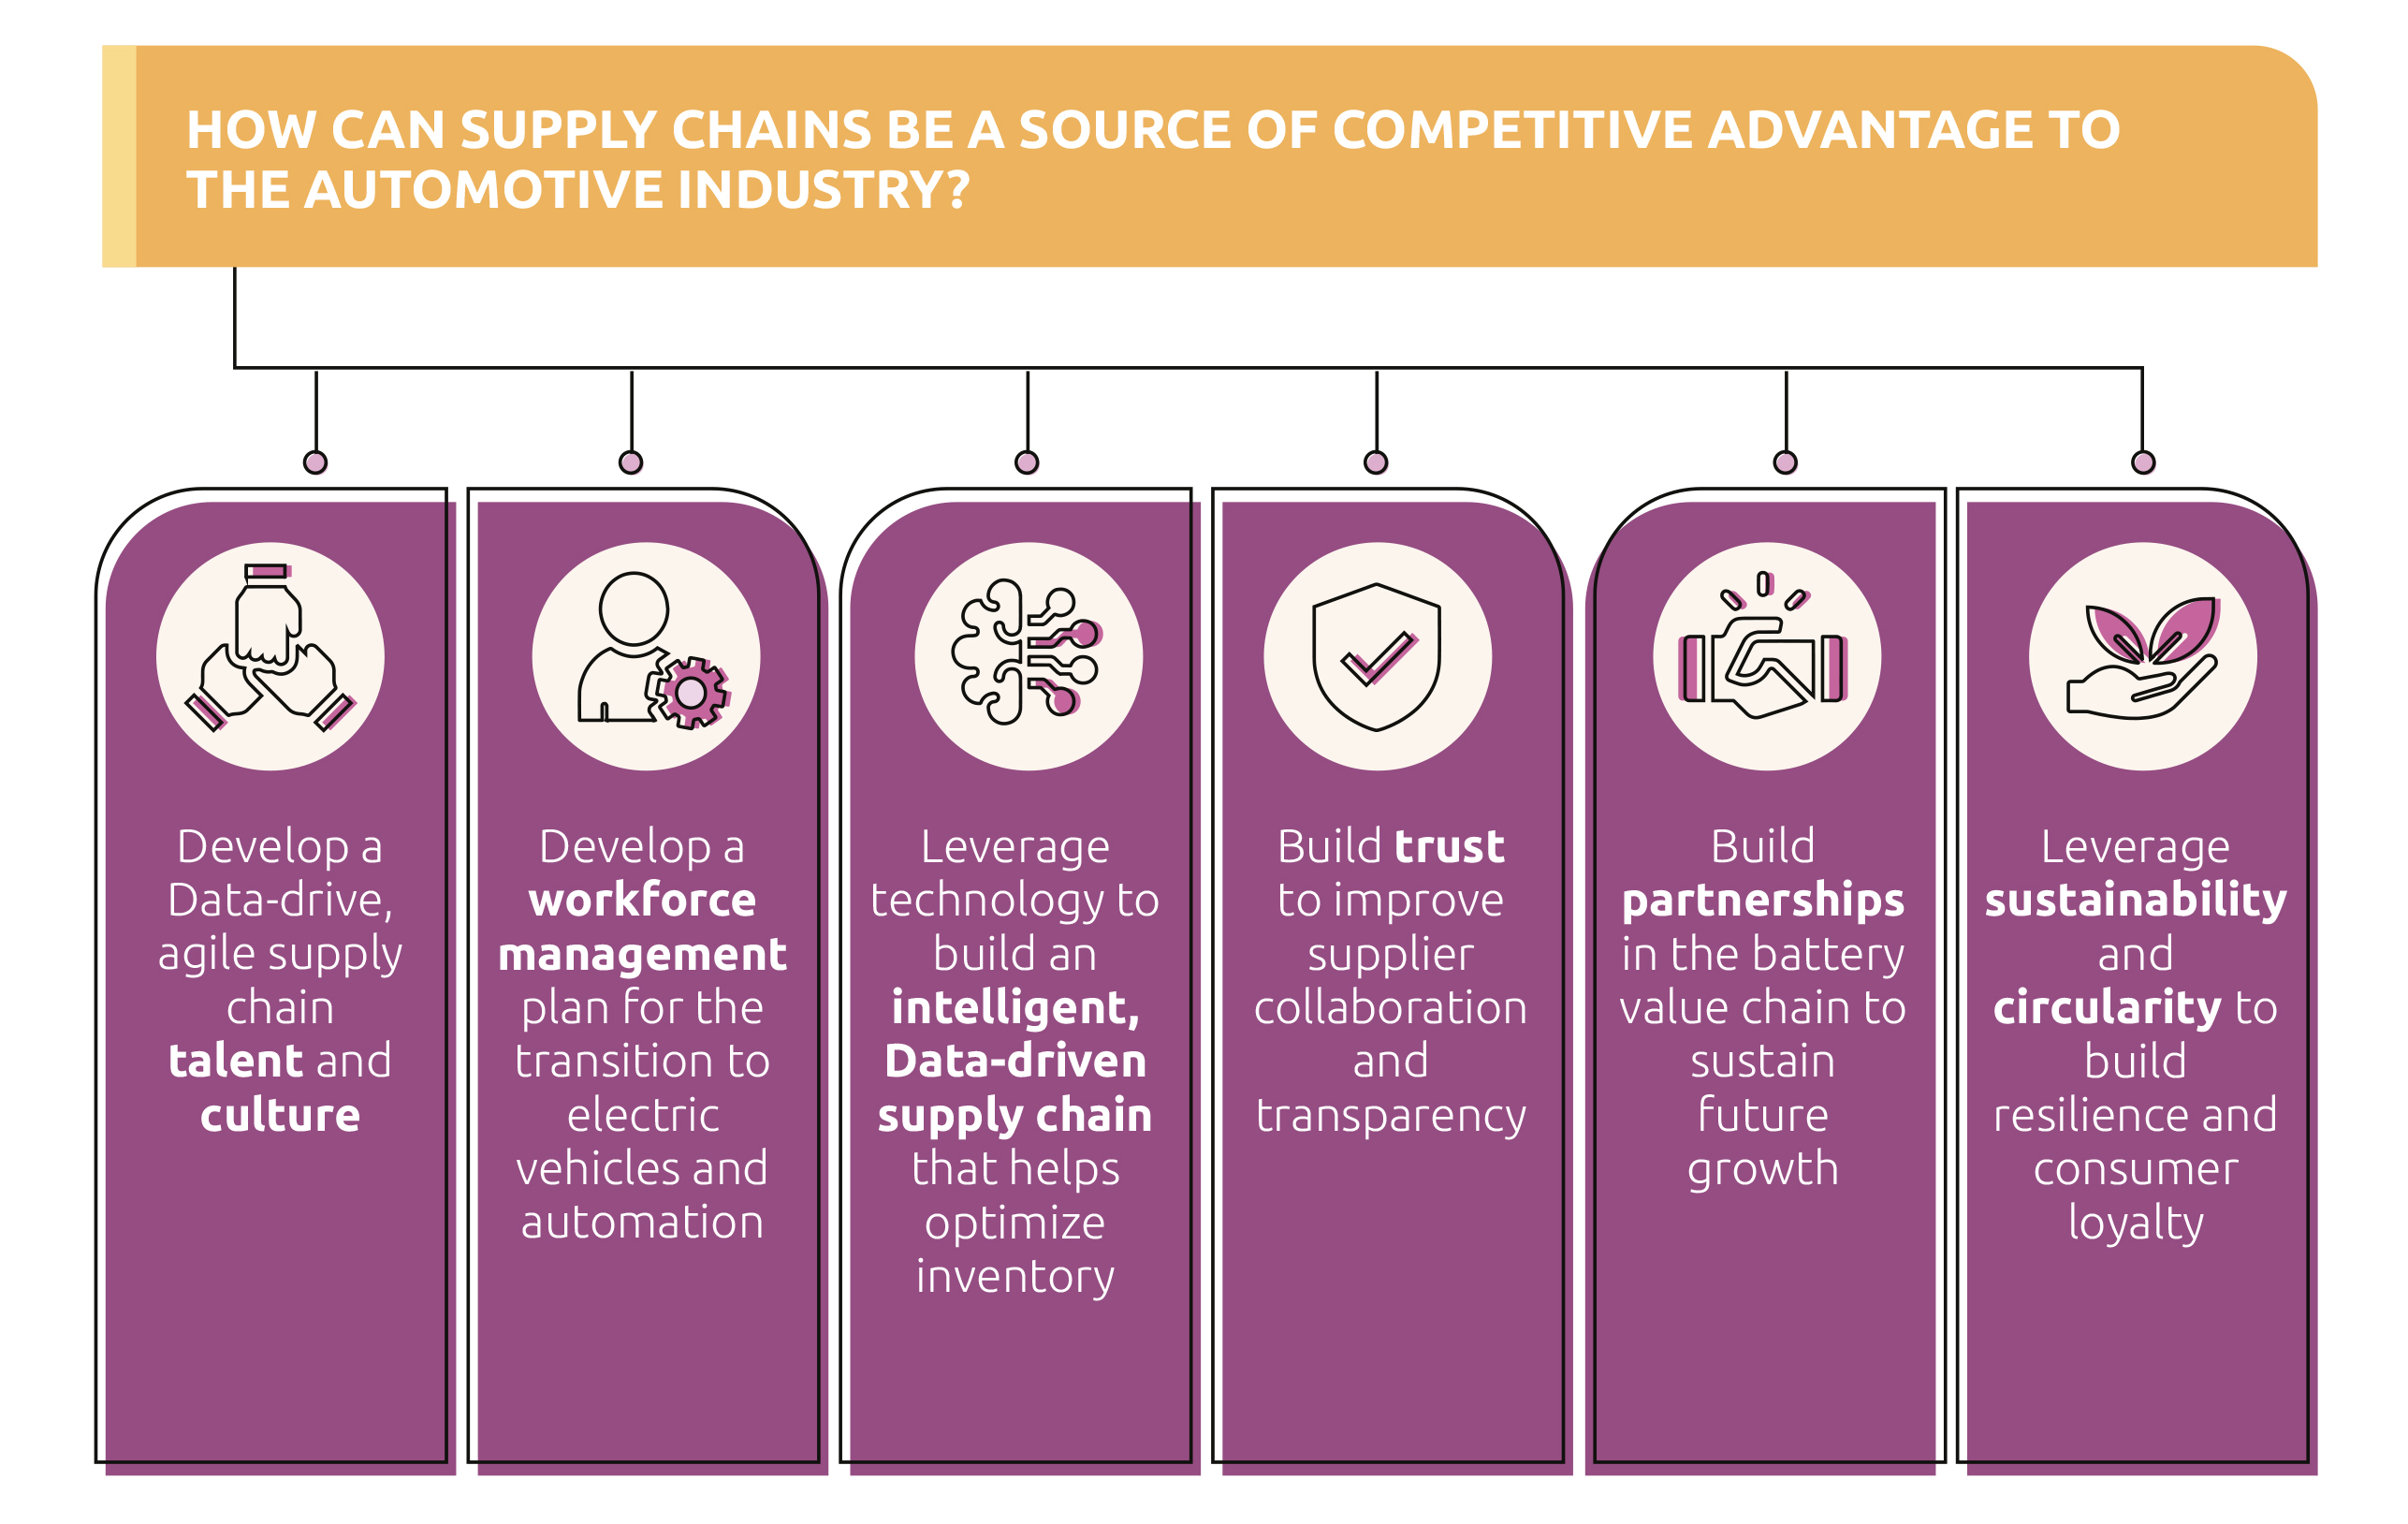 How can supply chains be a source of competitive advantage to the automotive industry?